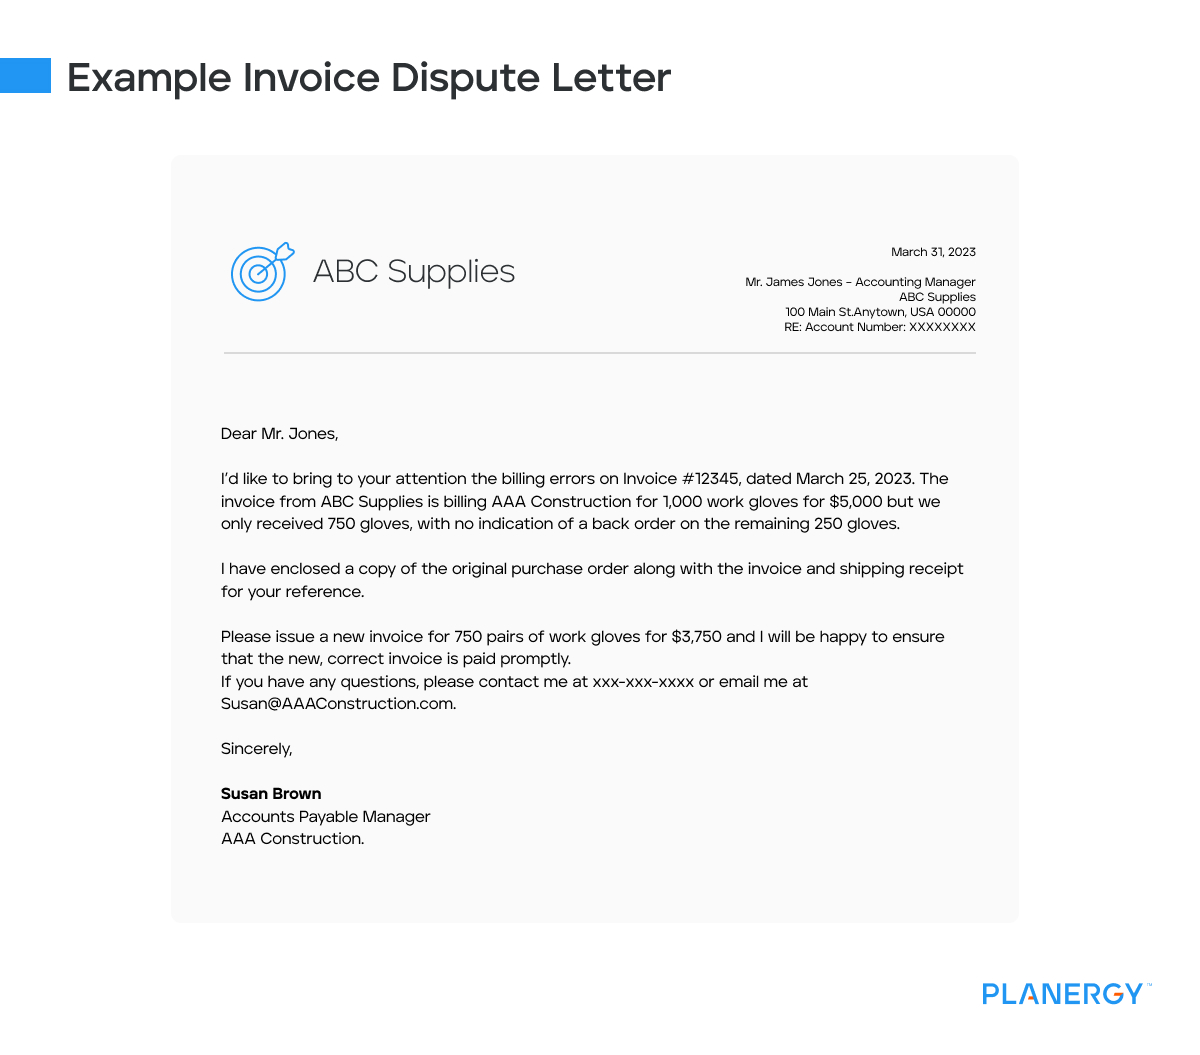 Example invoice dispute letter